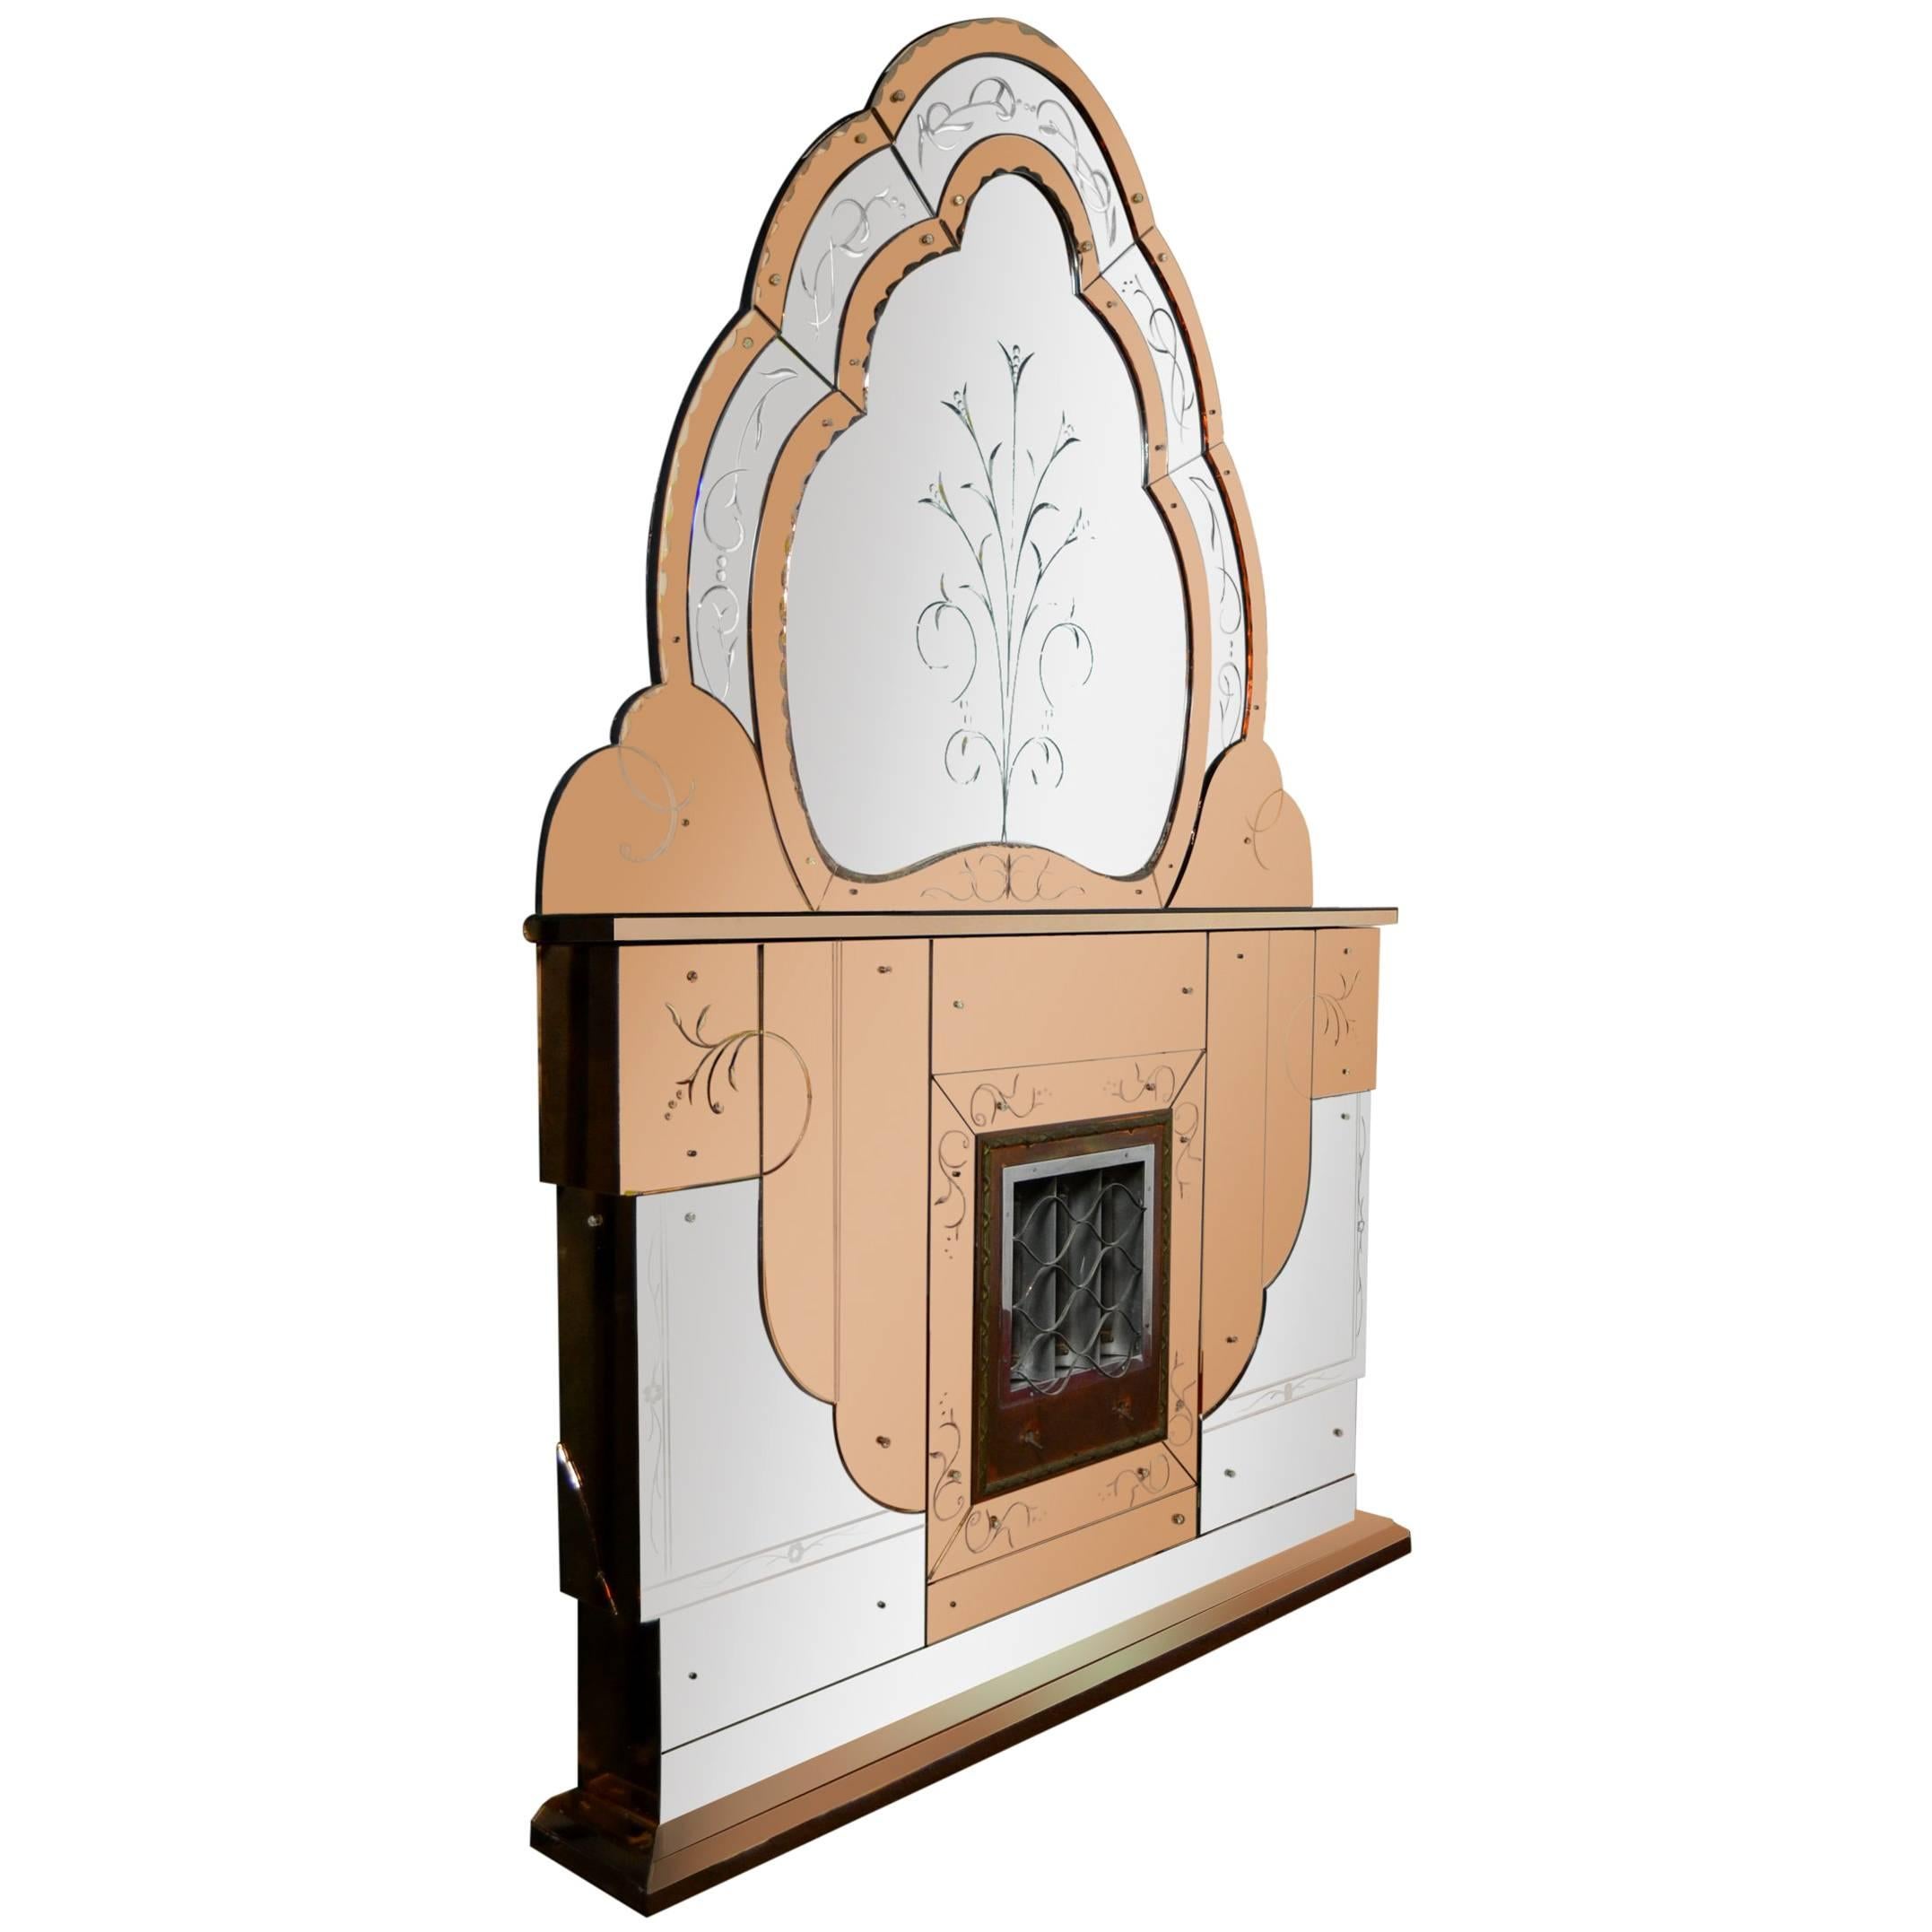 1930s Art Deco Electric Fireplace with Beveled Two Colored Overmantel Mirror